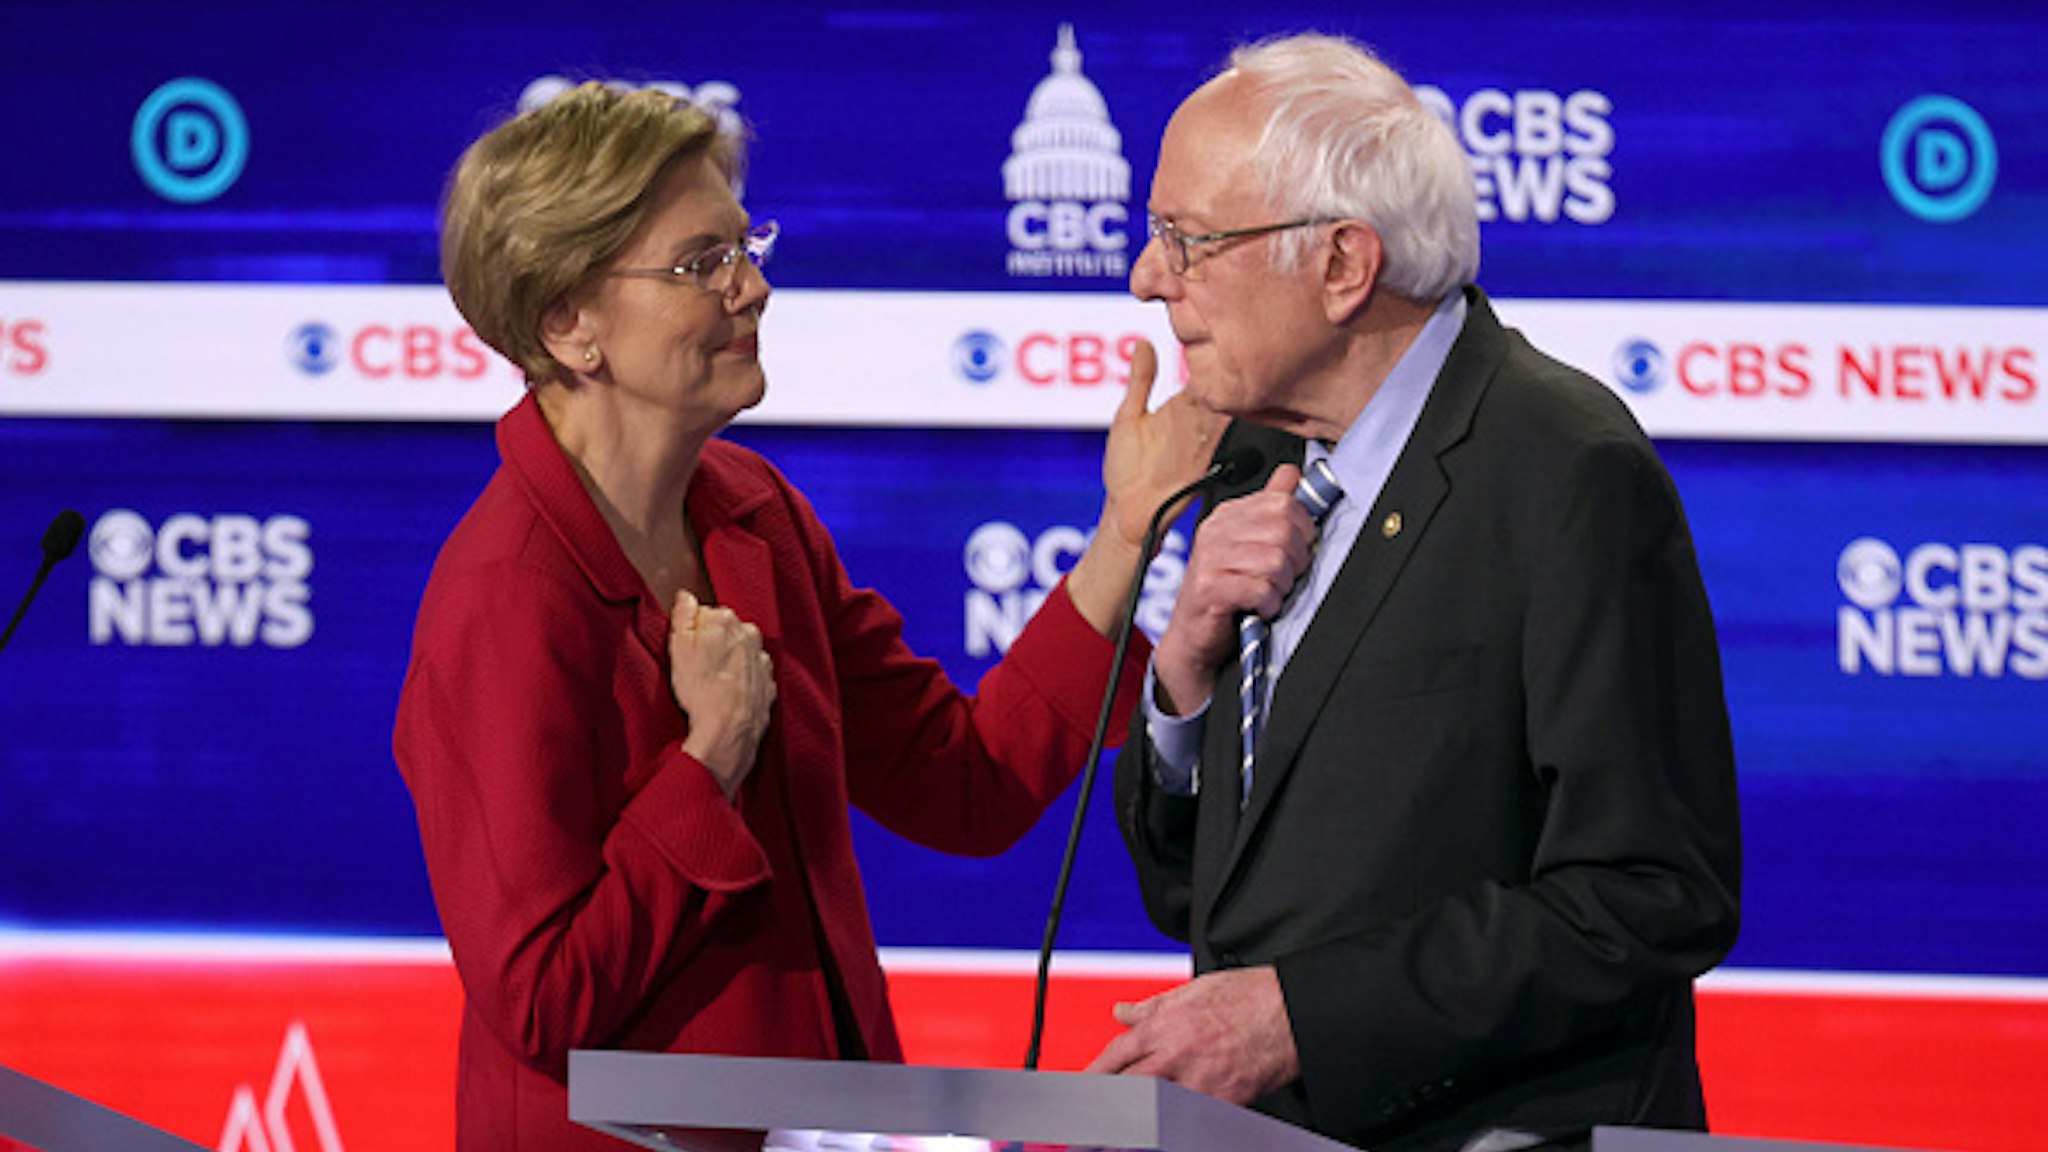 CHARLESTON, SOUTH CAROLINA - FEBRUARY 25: Democratic presidential candidates Sen. Elizabeth Warren (D-MA) (L) and Sen. Bernie Sanders (I-VT) interact during a break at the Democratic presidential primary debate at the Charleston Gaillard Center on February 25, 2020 in Charleston, South Carolina. Seven candidates qualified for the debate, hosted by CBS News and Congressional Black Caucus Institute, ahead of South Carolina’s primary in four days.